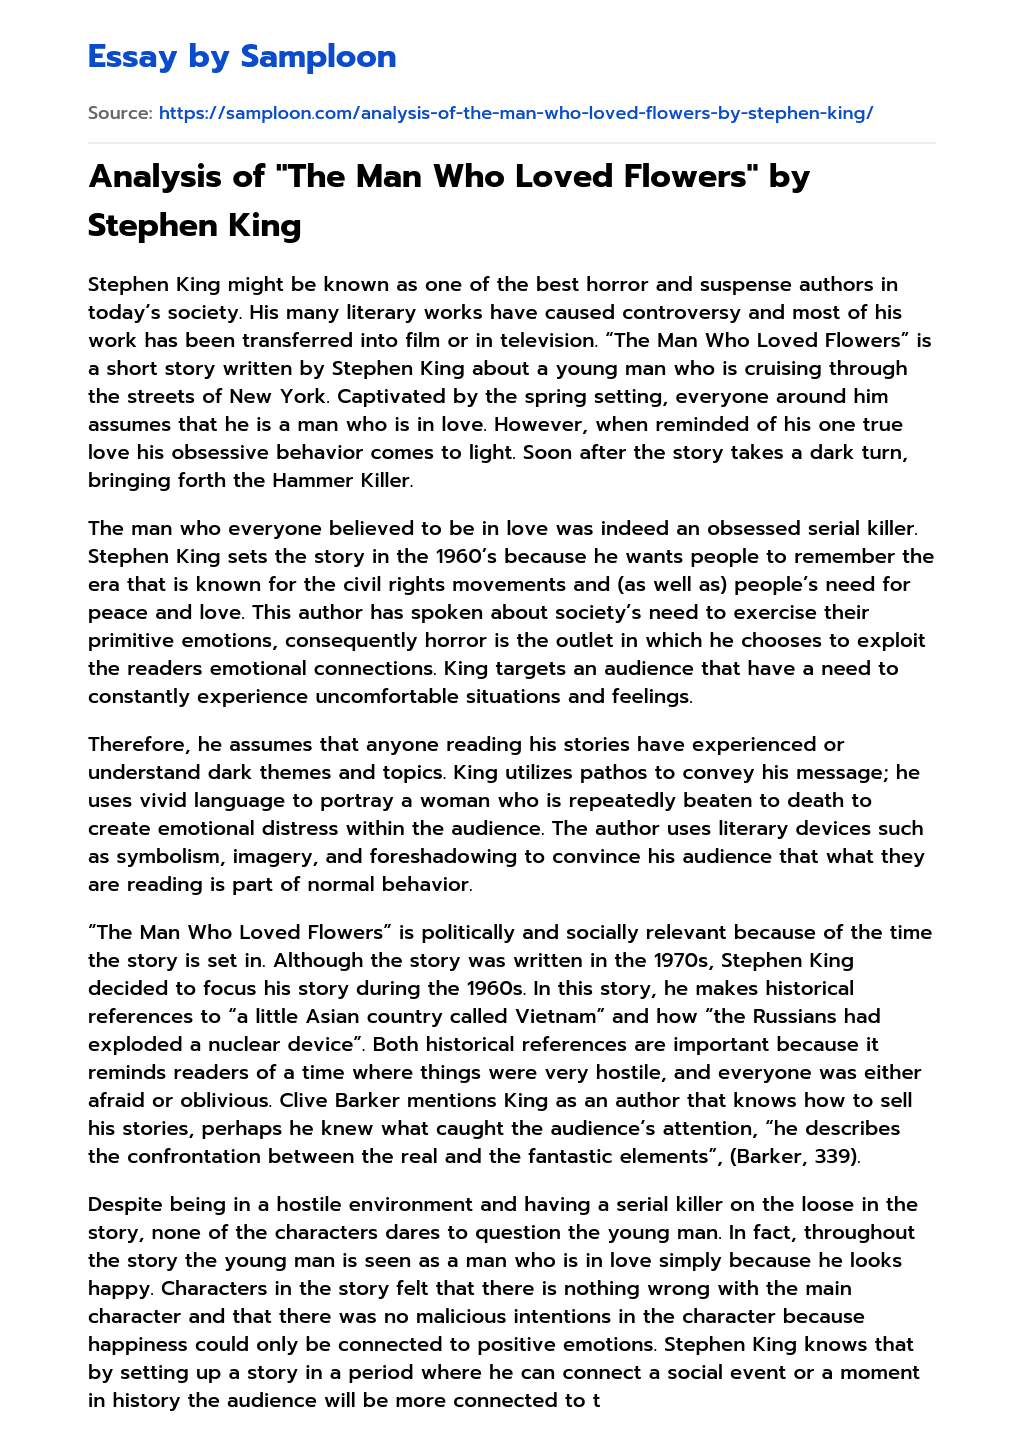 Analysis of “The Man Who Loved Flowers” by Stephen King Accomplishment Essay essay